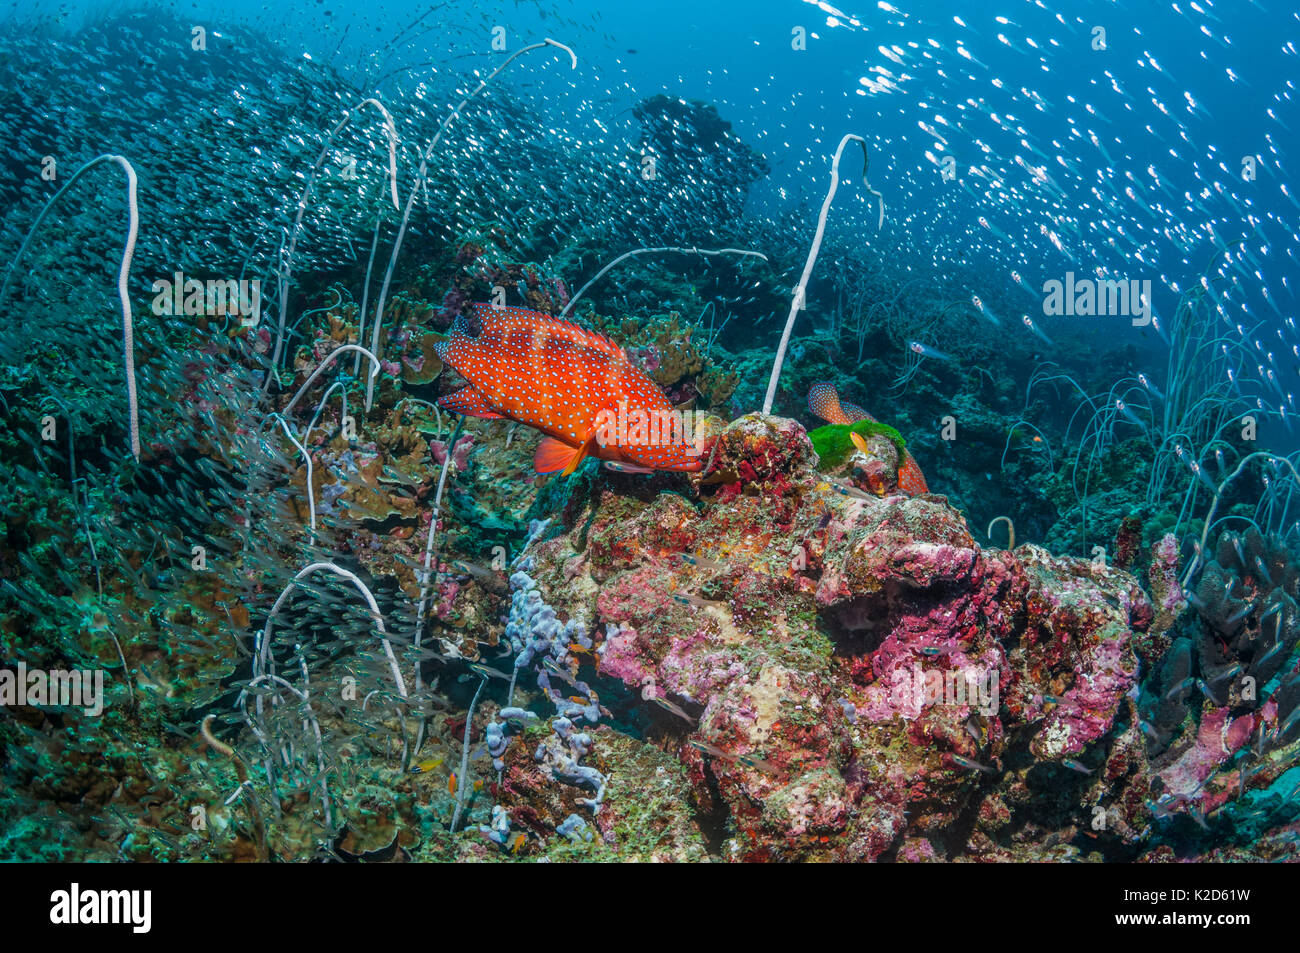 Coral reef with a Coral hind (Cephalophus miniata), Delicate sea whips (Jungceellia fragilis) and a large number of Pygmy sweepers (Parapriacanthus ransonetti) Similan Islands, Andaman Sea, Thailand. Stock Photo